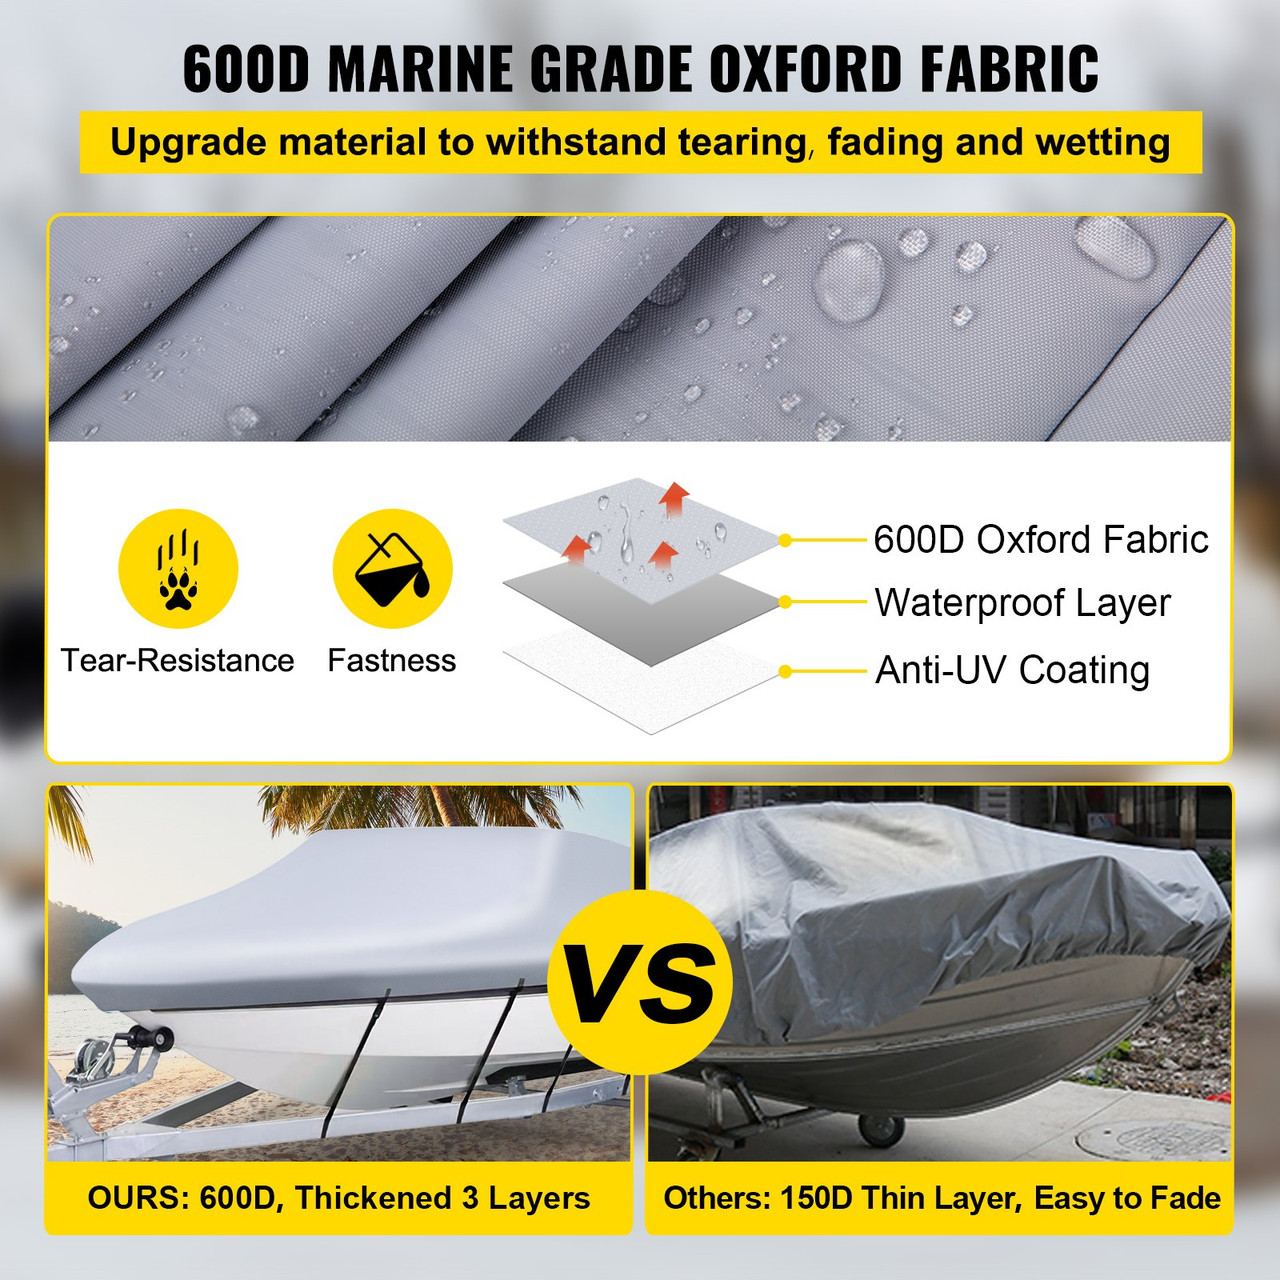 Waterproof Boat Cover, 20'-22' Trailerable Boat Cover, Beam Width up to 106" v Hull Cover Heavy Duty 600D Marine Grade Polyester Mooring Cover for Fits V-Hull Boat with 5 Tightening Straps